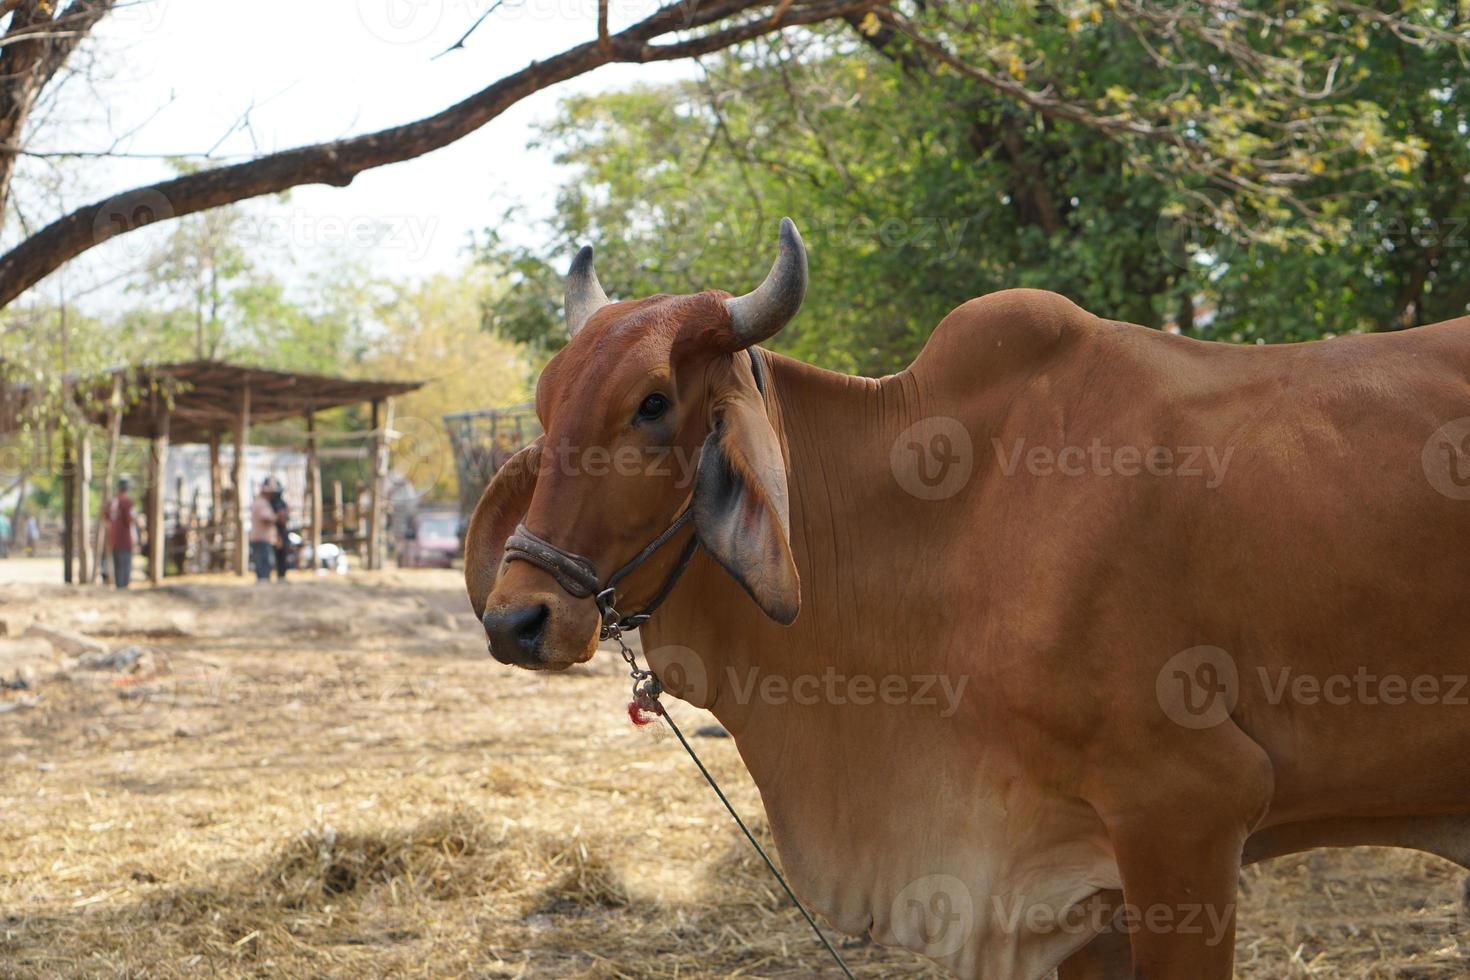 cows were brought by their owners to be sold at the market. photo